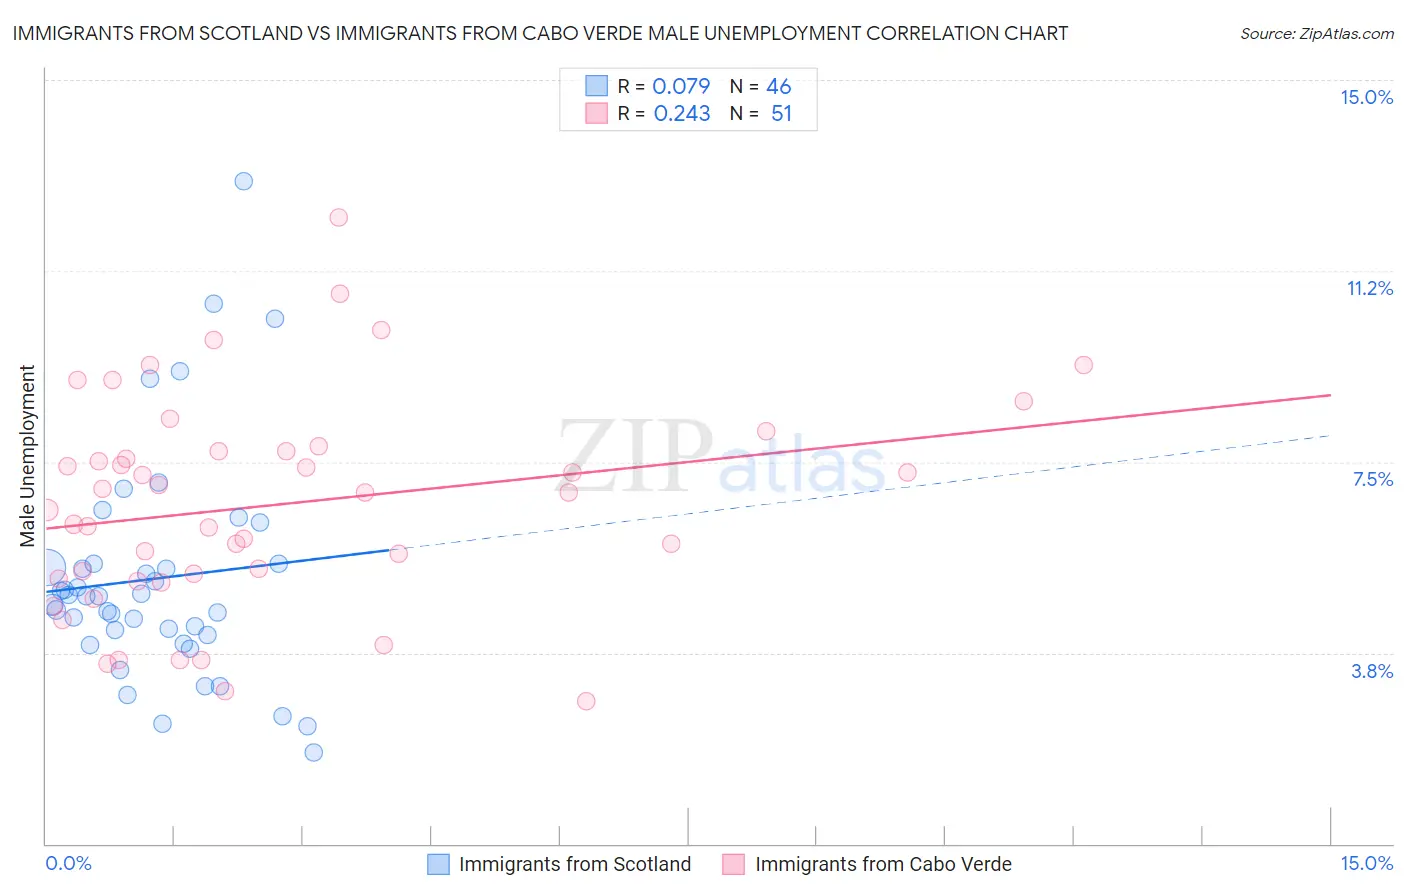 Immigrants from Scotland vs Immigrants from Cabo Verde Male Unemployment